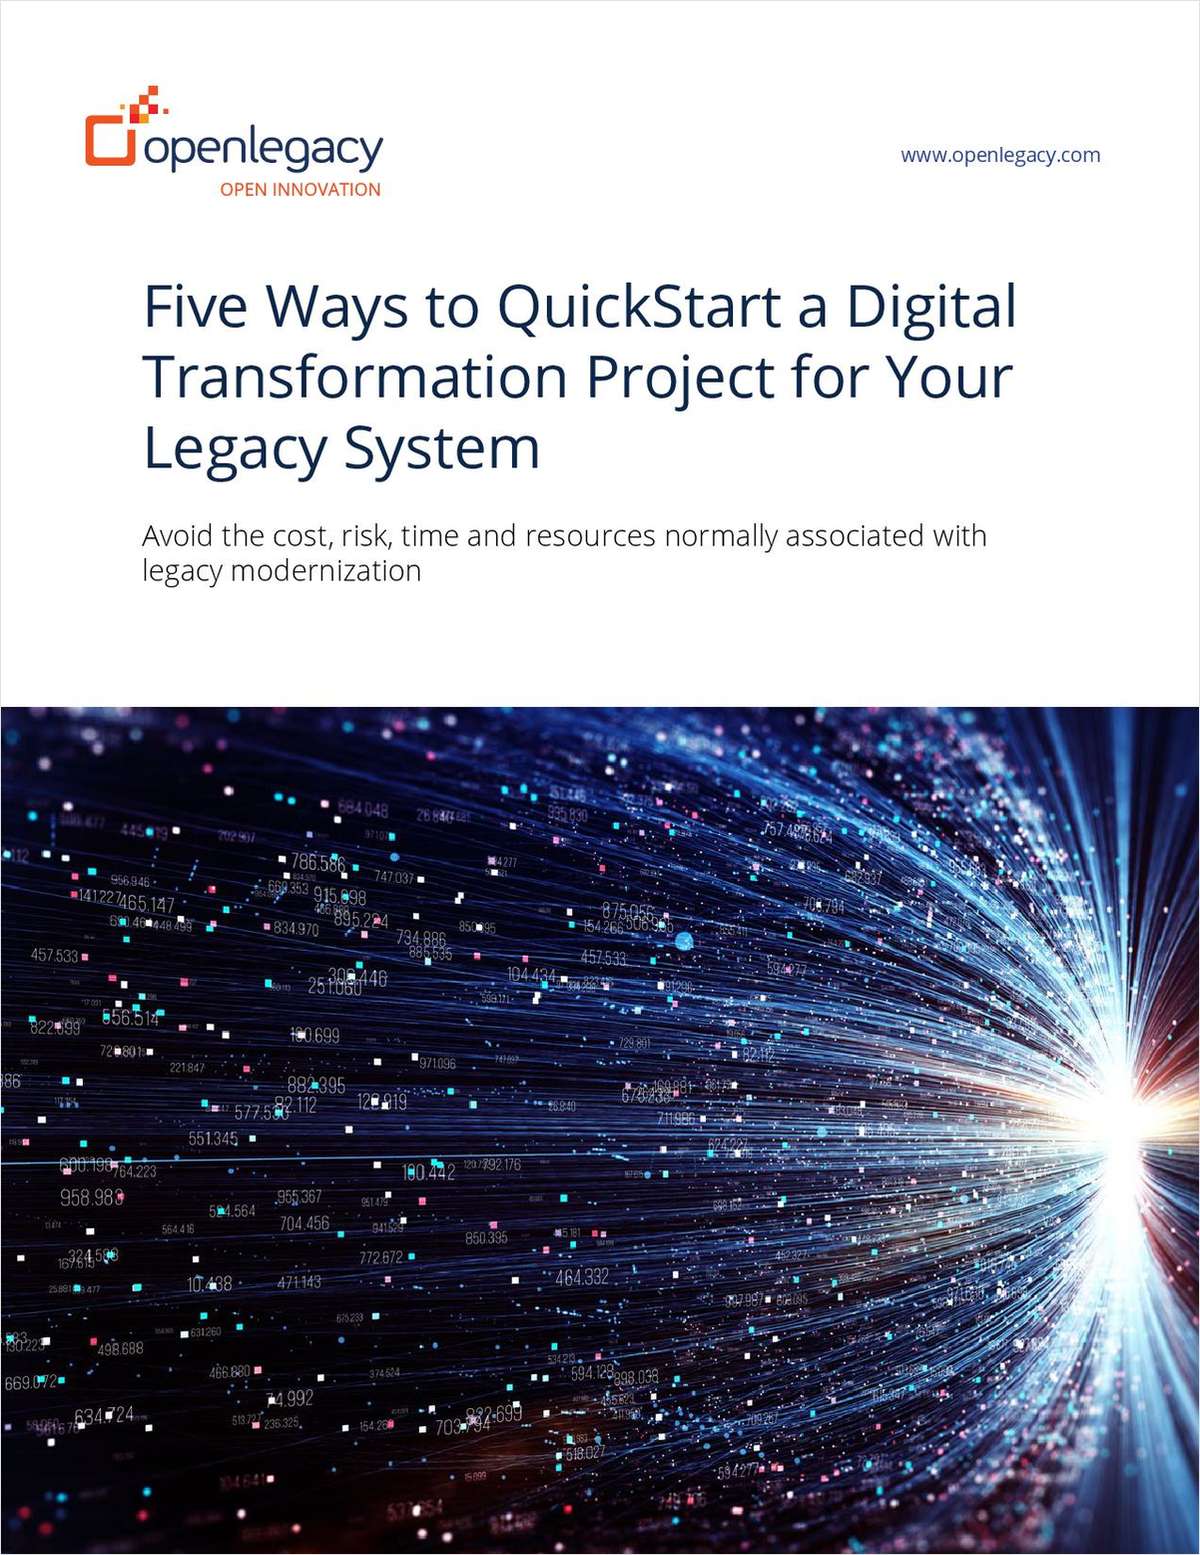 Five Ways to QuickStart a Digital Transformation Project for Your Legacy System